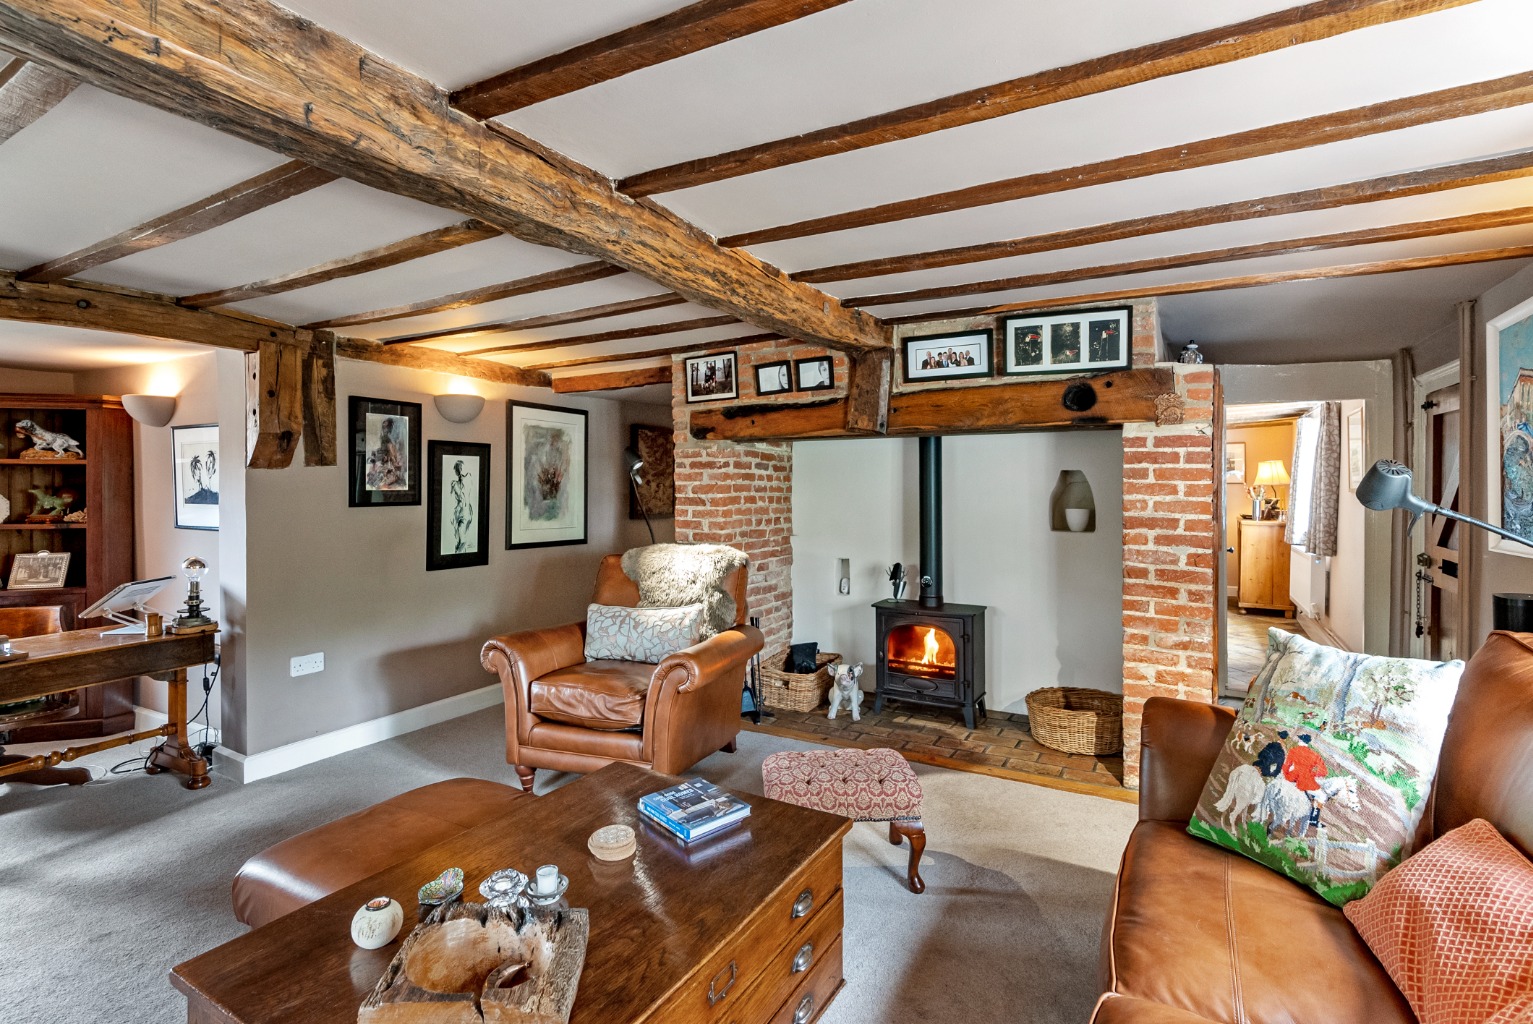 Situated in an idyllic spot overlooking the river in the pretty Cambridgeshire village of Alconbury Weston, this wonderfully characterful home offers a superb and rarely seen blend of modern day living with all the charm and features of a time long since past.